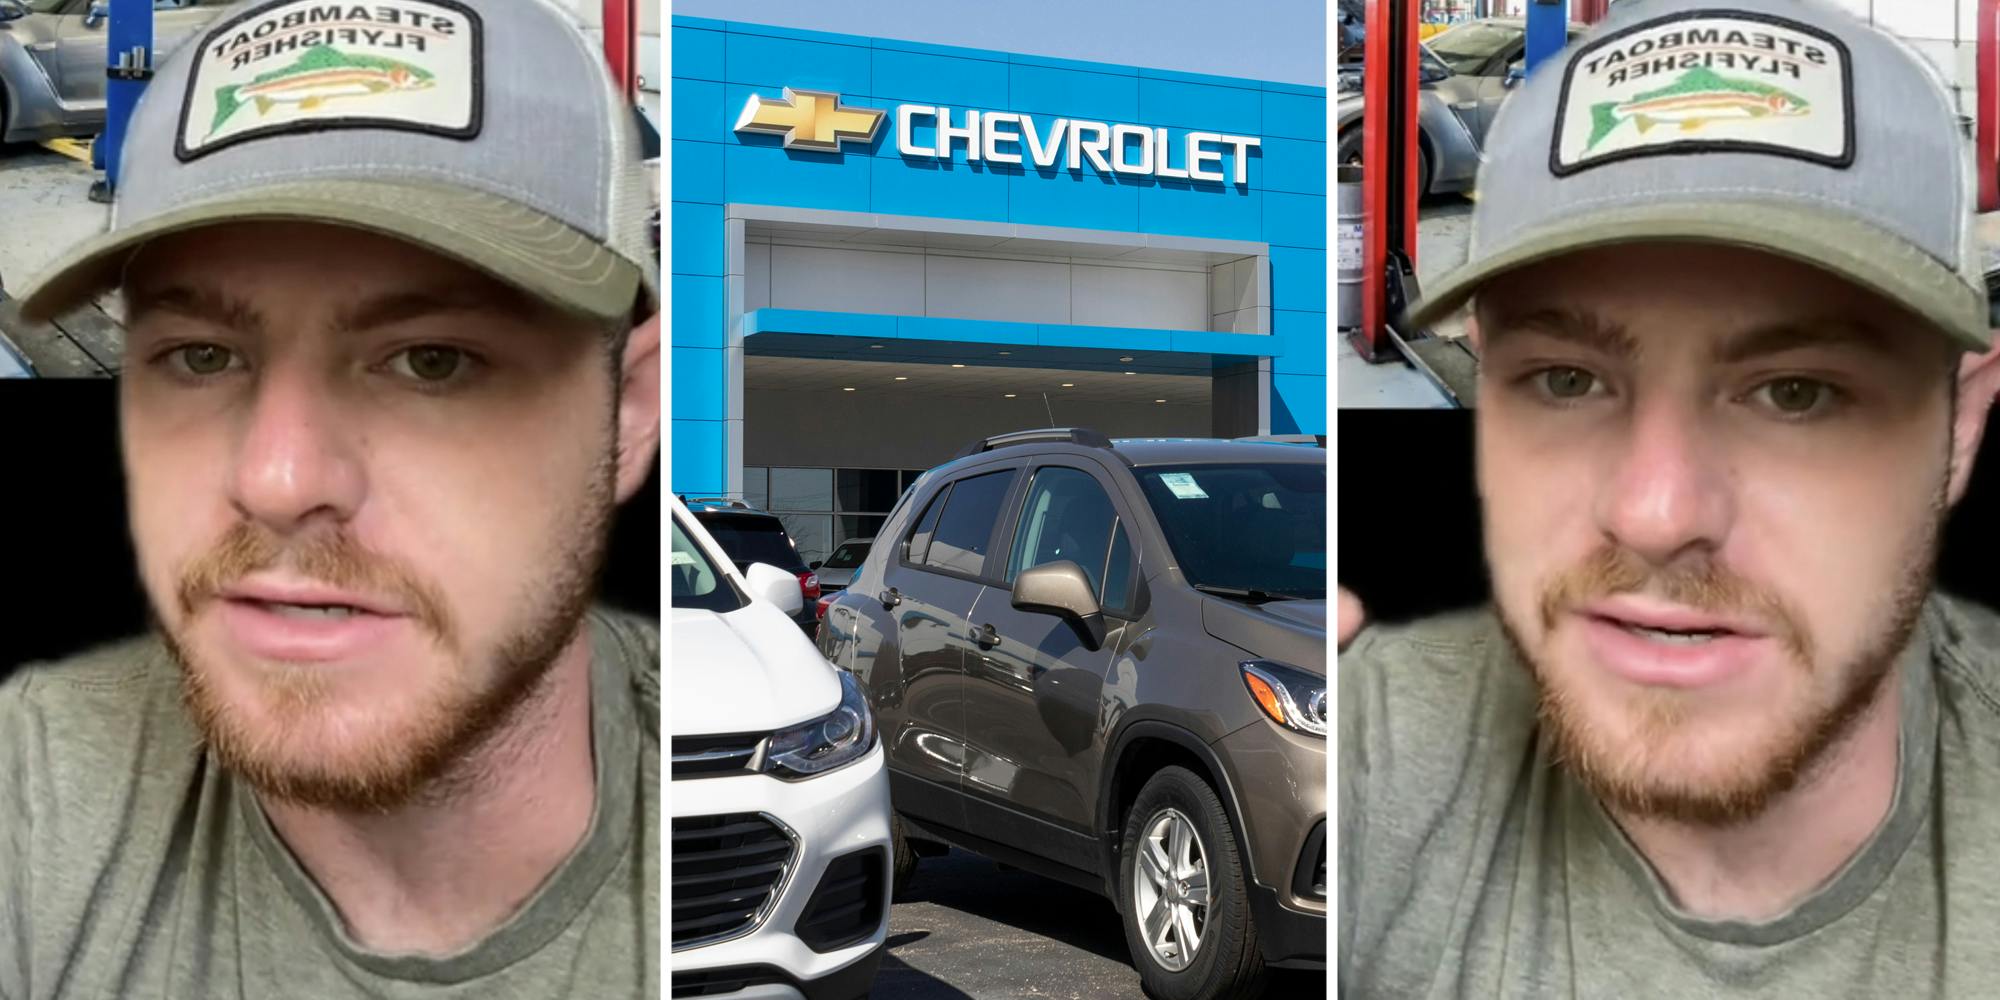 ‘It blows my mind still seeing people buy the Chevy Cruze’: Mechanic reveals 5 cars known for engine failure